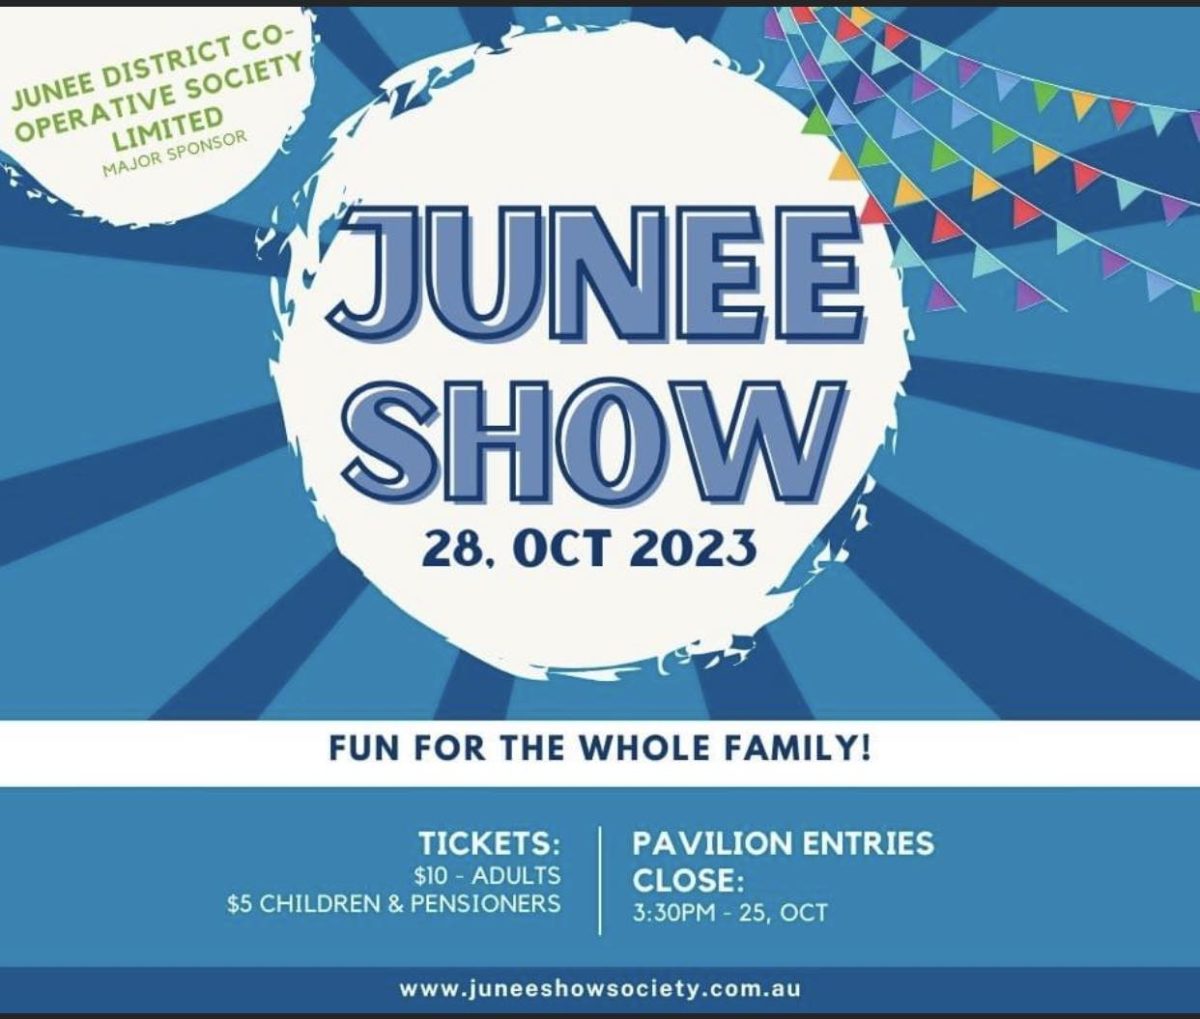 Junee Show promises to be full of surprises this Sunday. 